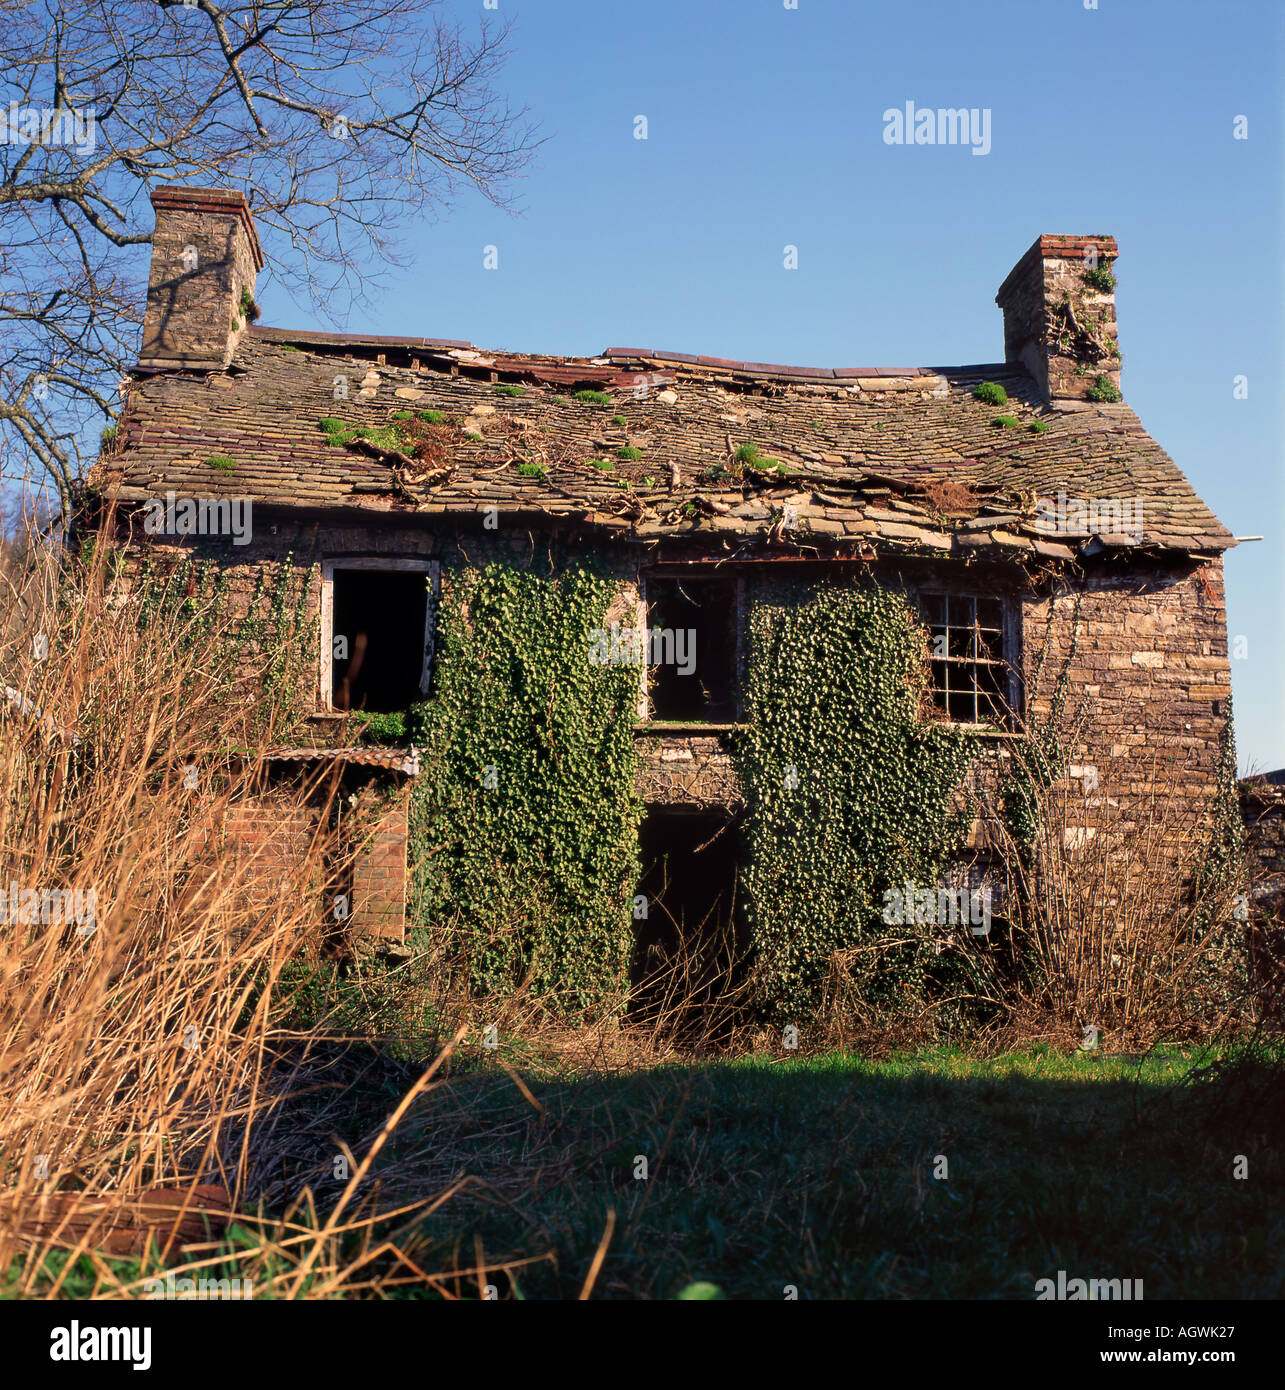 Derelict abandoned old stone house cottage with loose roof tiles Wales, UK KATHY DEWITT Stock Photo